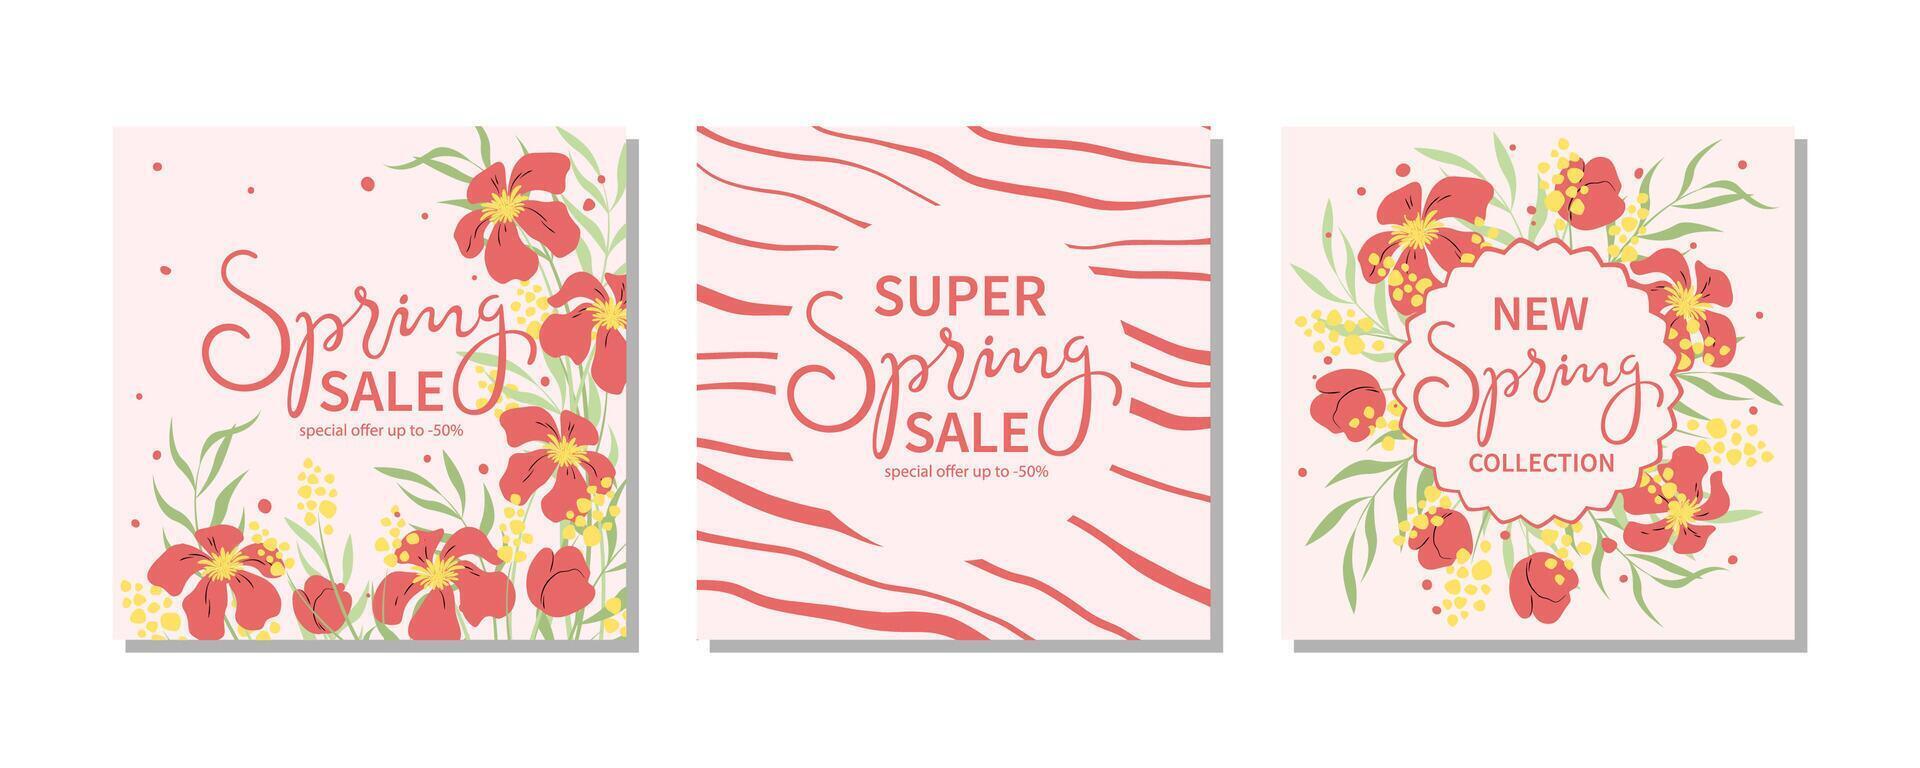 Set of spring sale banner template for social networks with colotful flowers, abstraction and lettering. Suitable for promotions, stories, post and internet ads. Vector illustration.